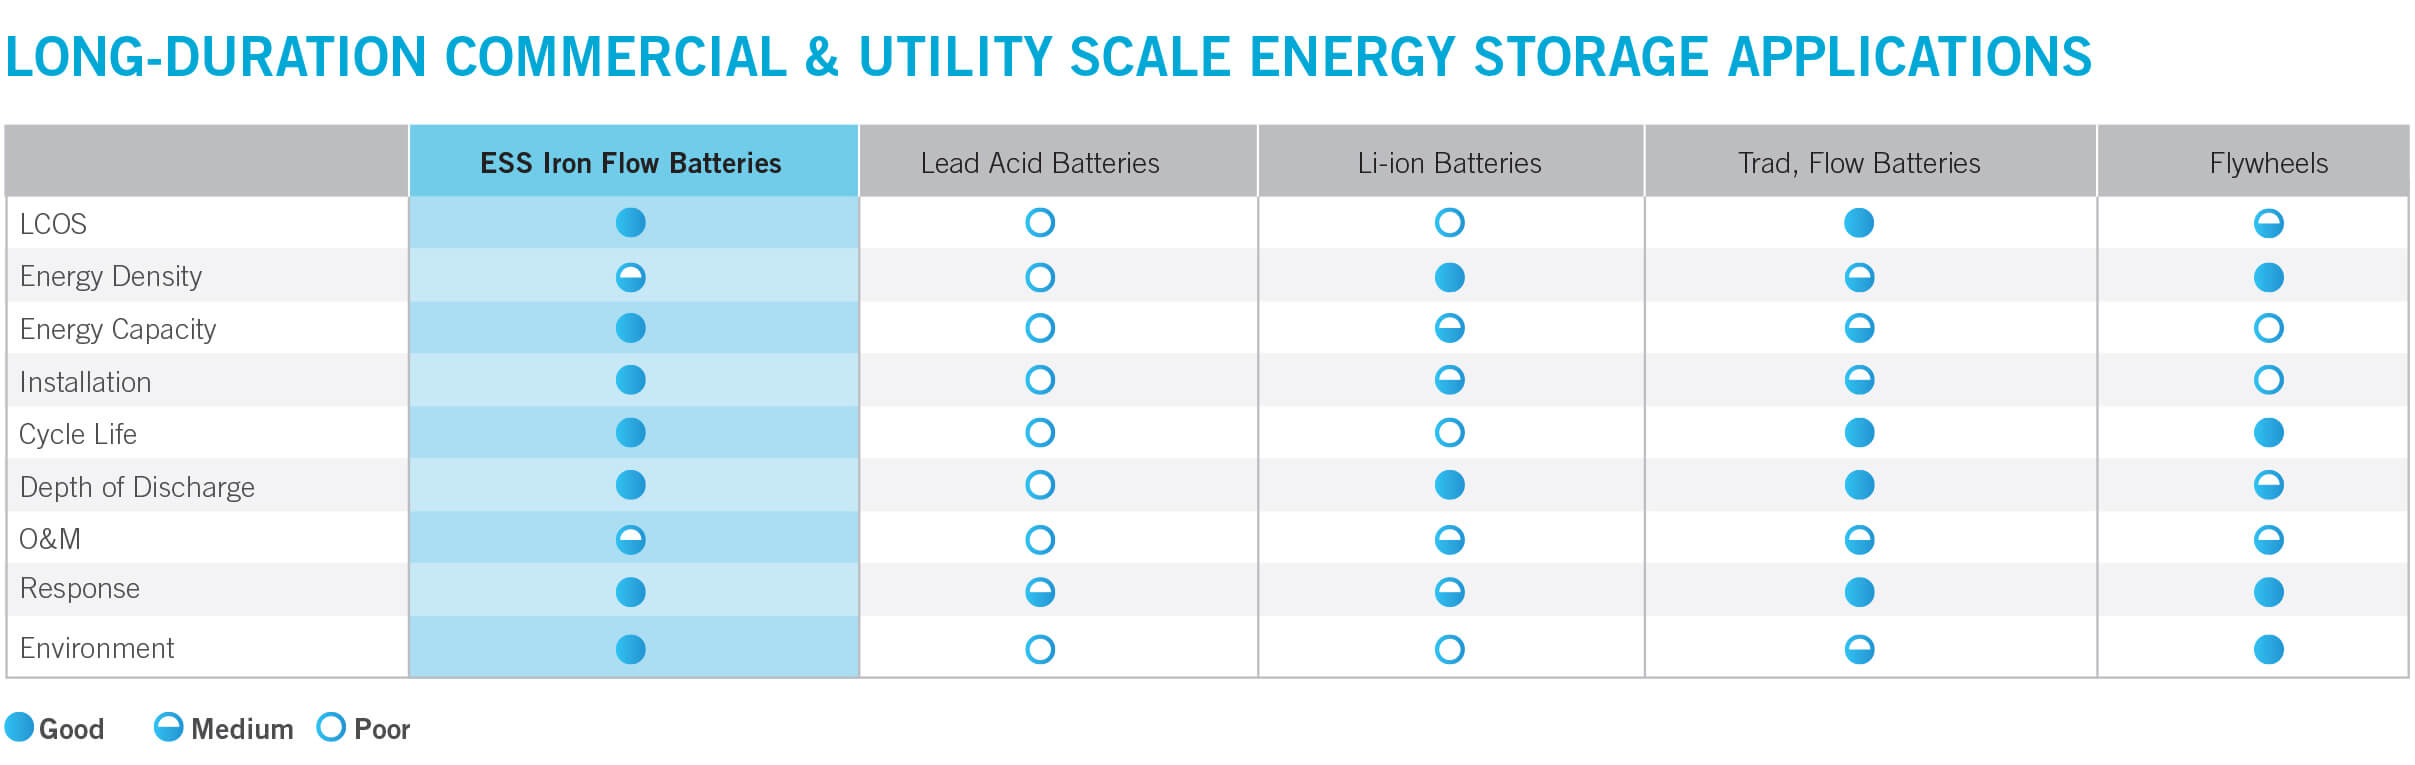 Long Duration Commercial & Utility Scale Energy Storage Applications